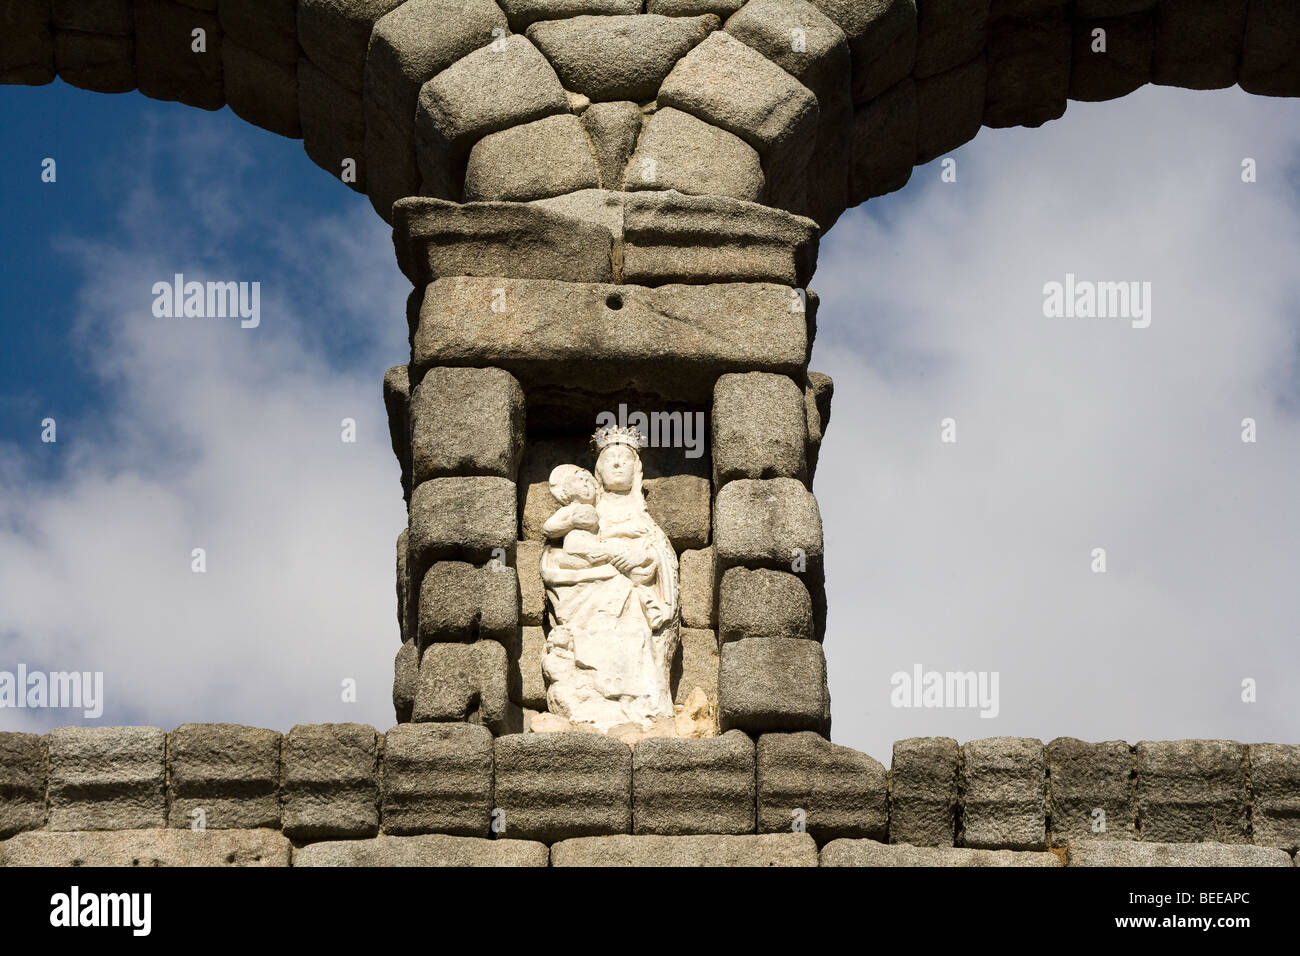 Statue of Virgin Mary and baby Jesus on Roman water aqueduct, detail, Segovia, Spain Stock Photo